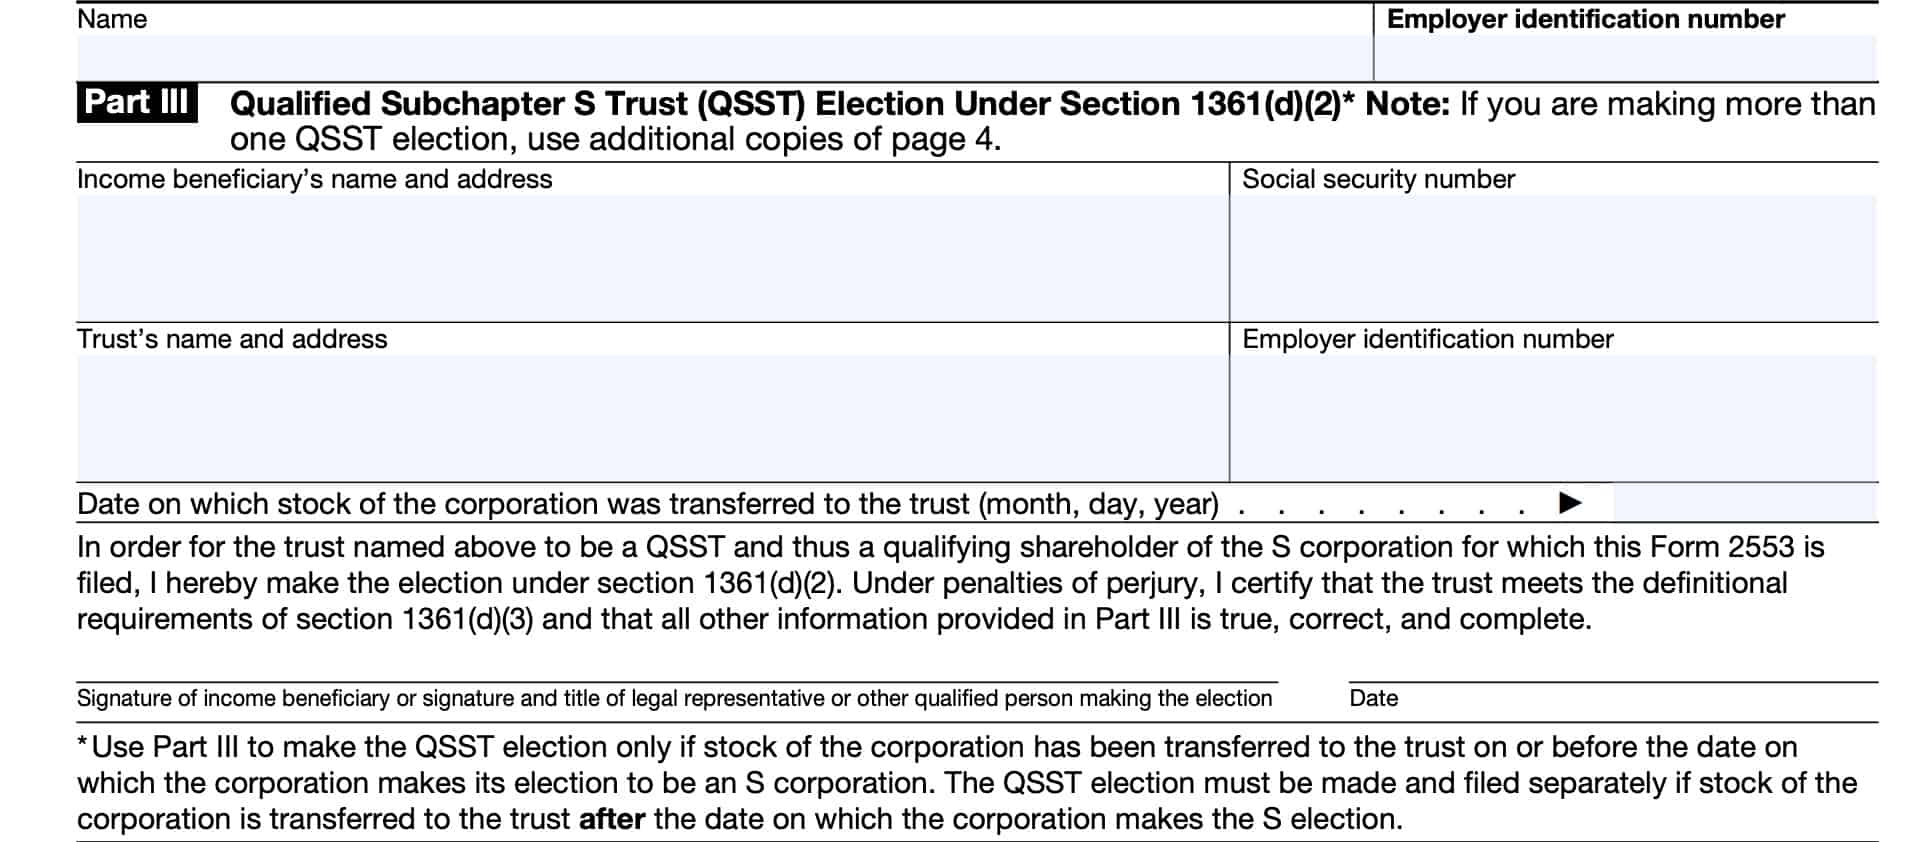 part iii, qualified subchapter s trust (QSST) election under Section 1351(d)(2)